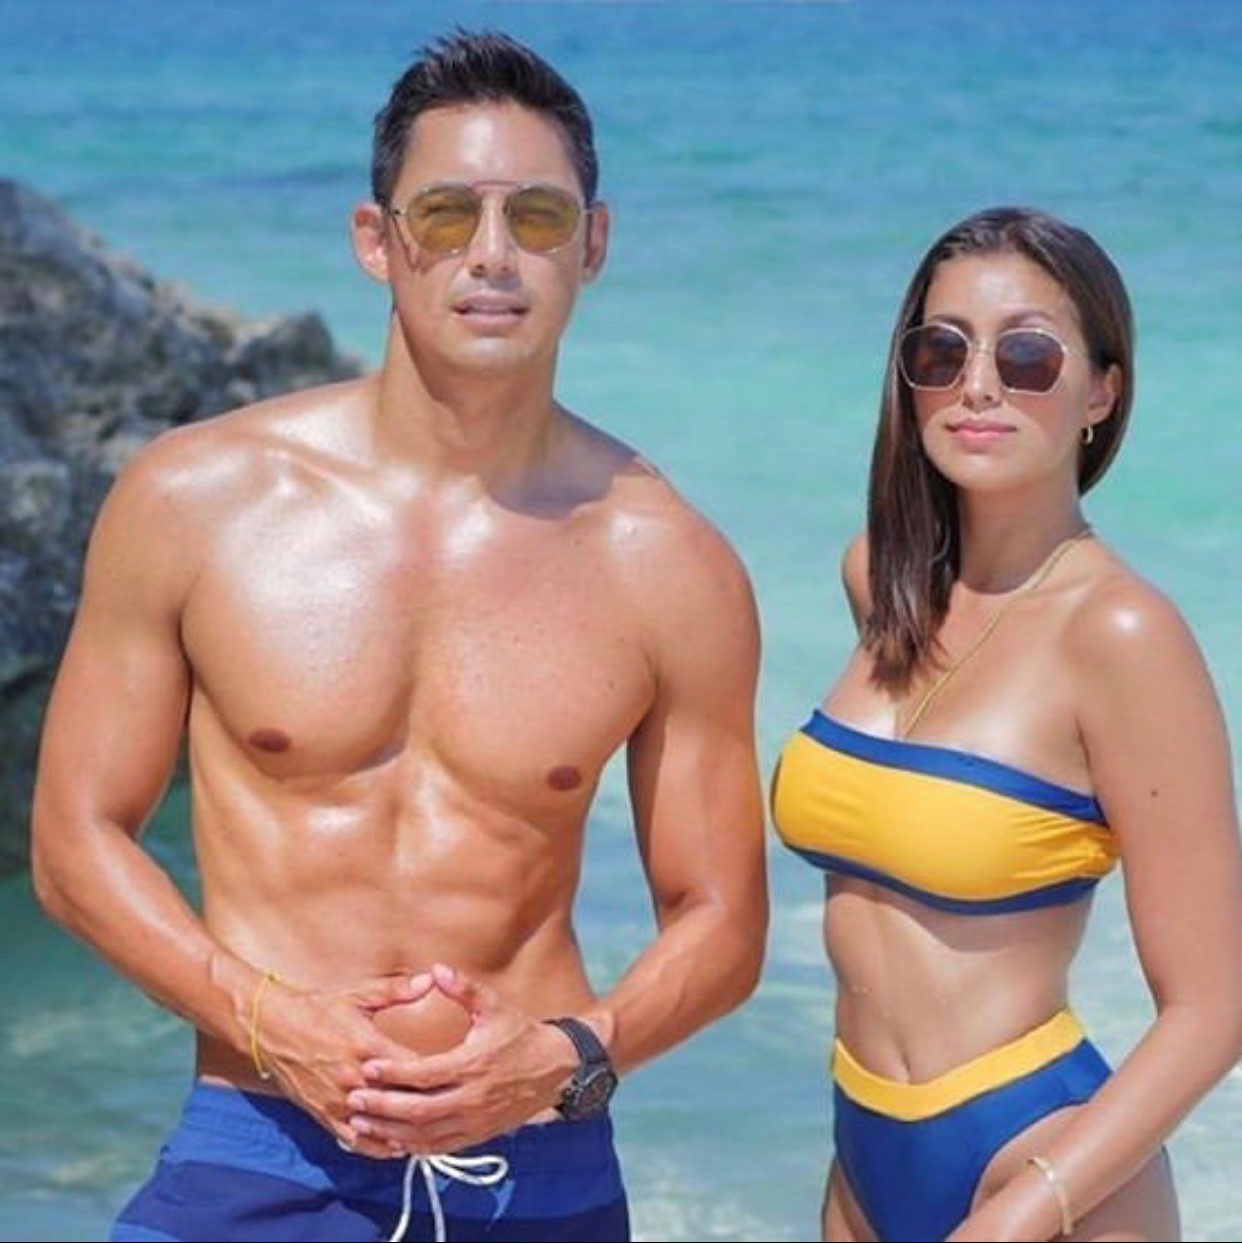 Hosts of Beached Marc Nelson and Rachel Peters